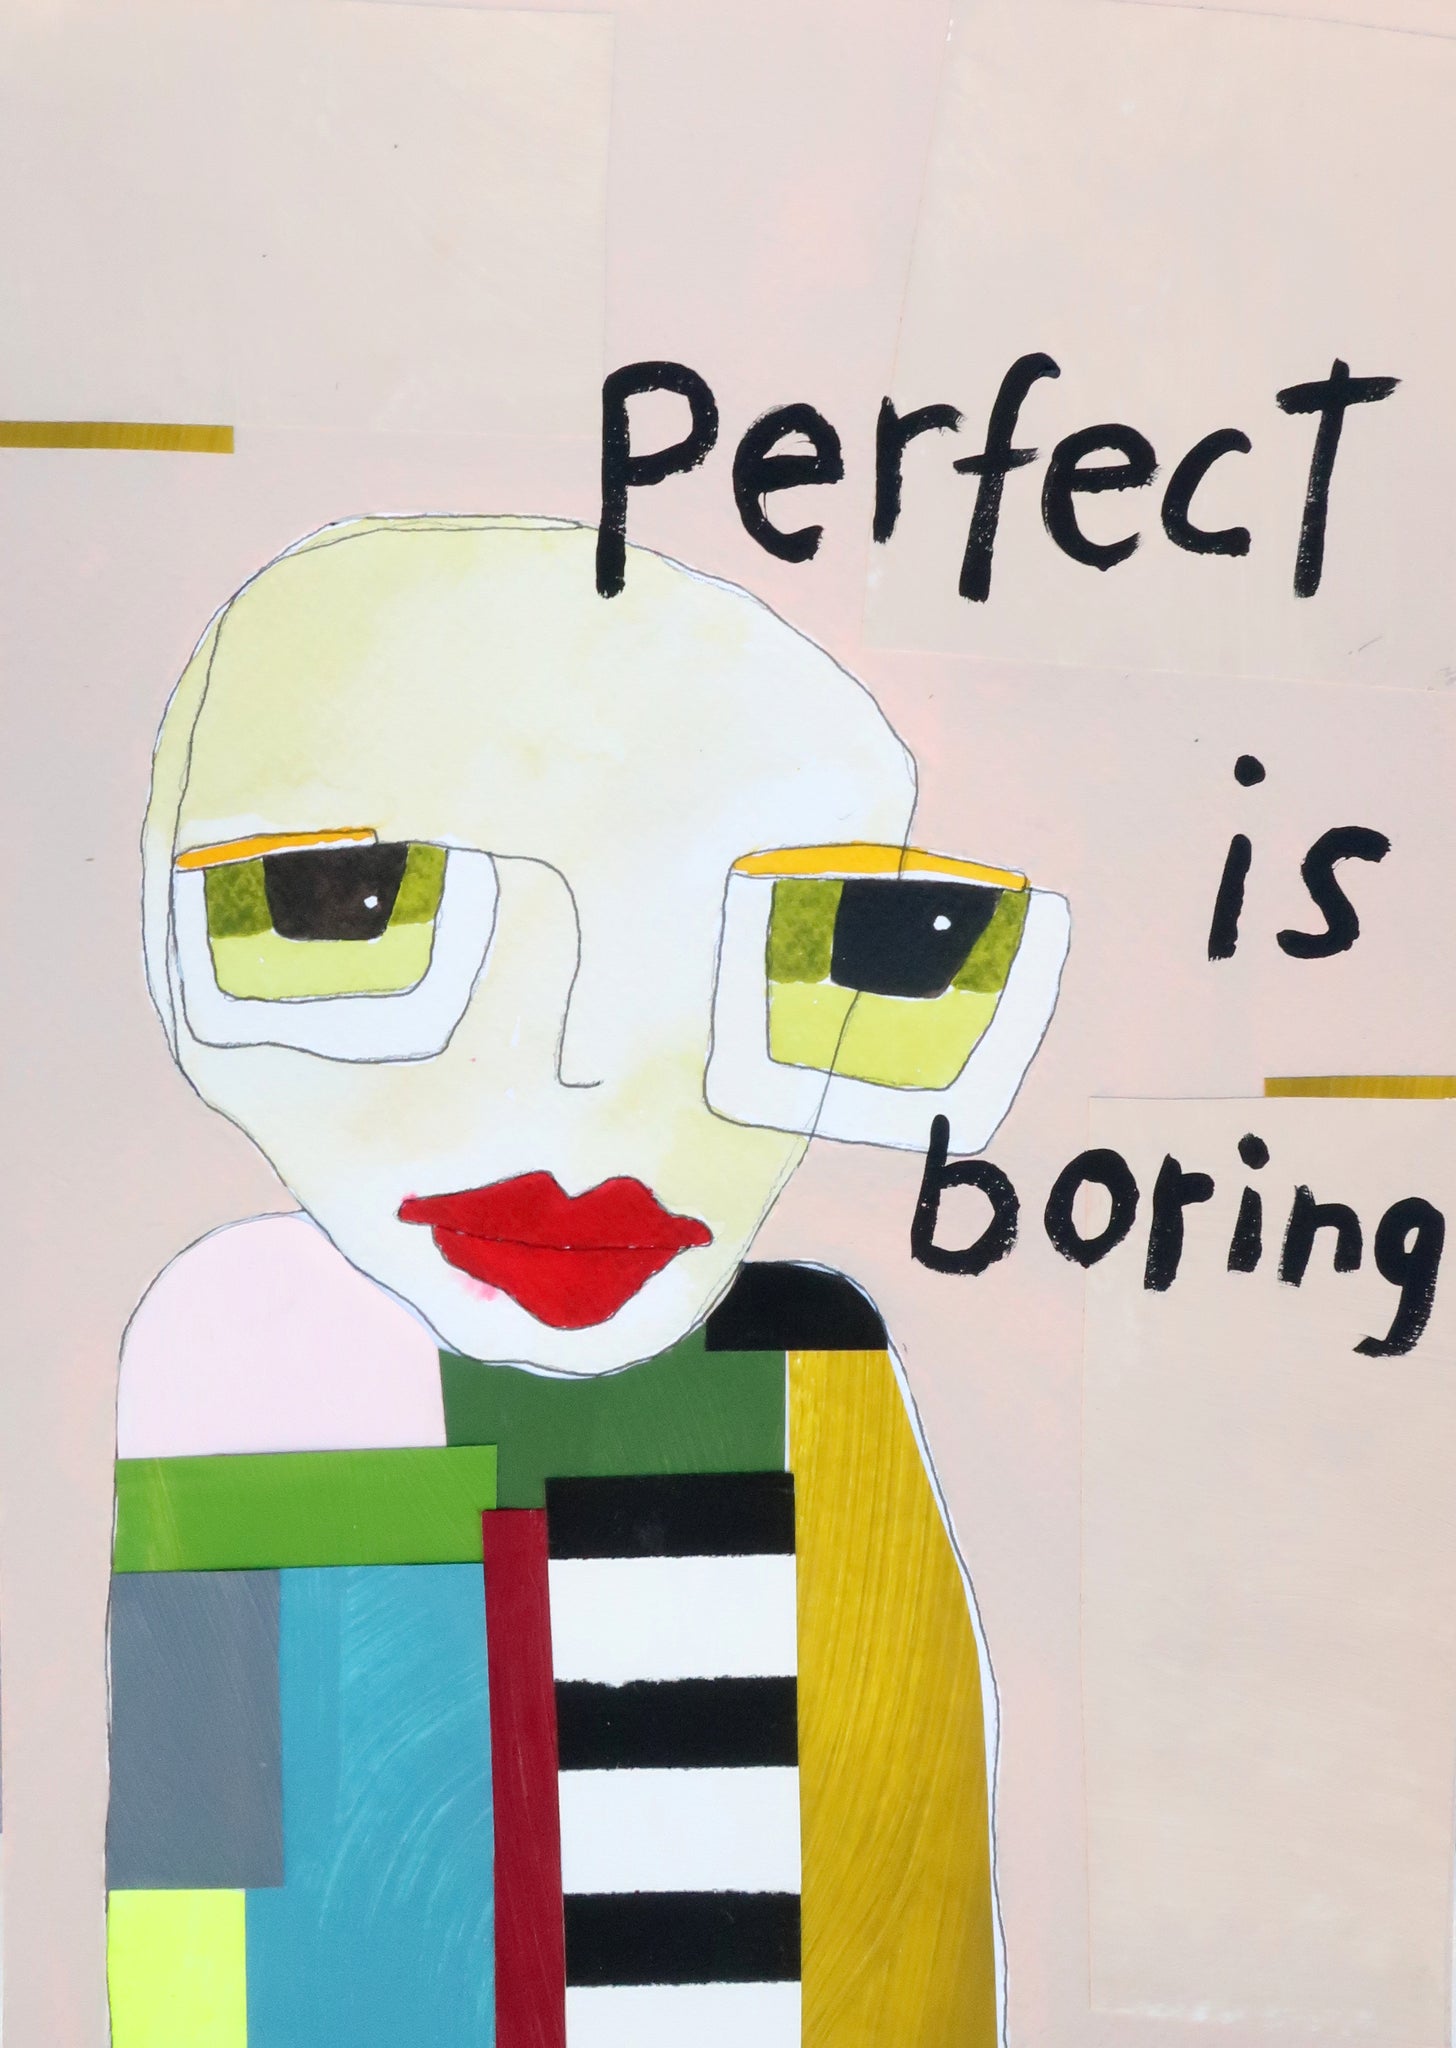 Perfect is boring in rose